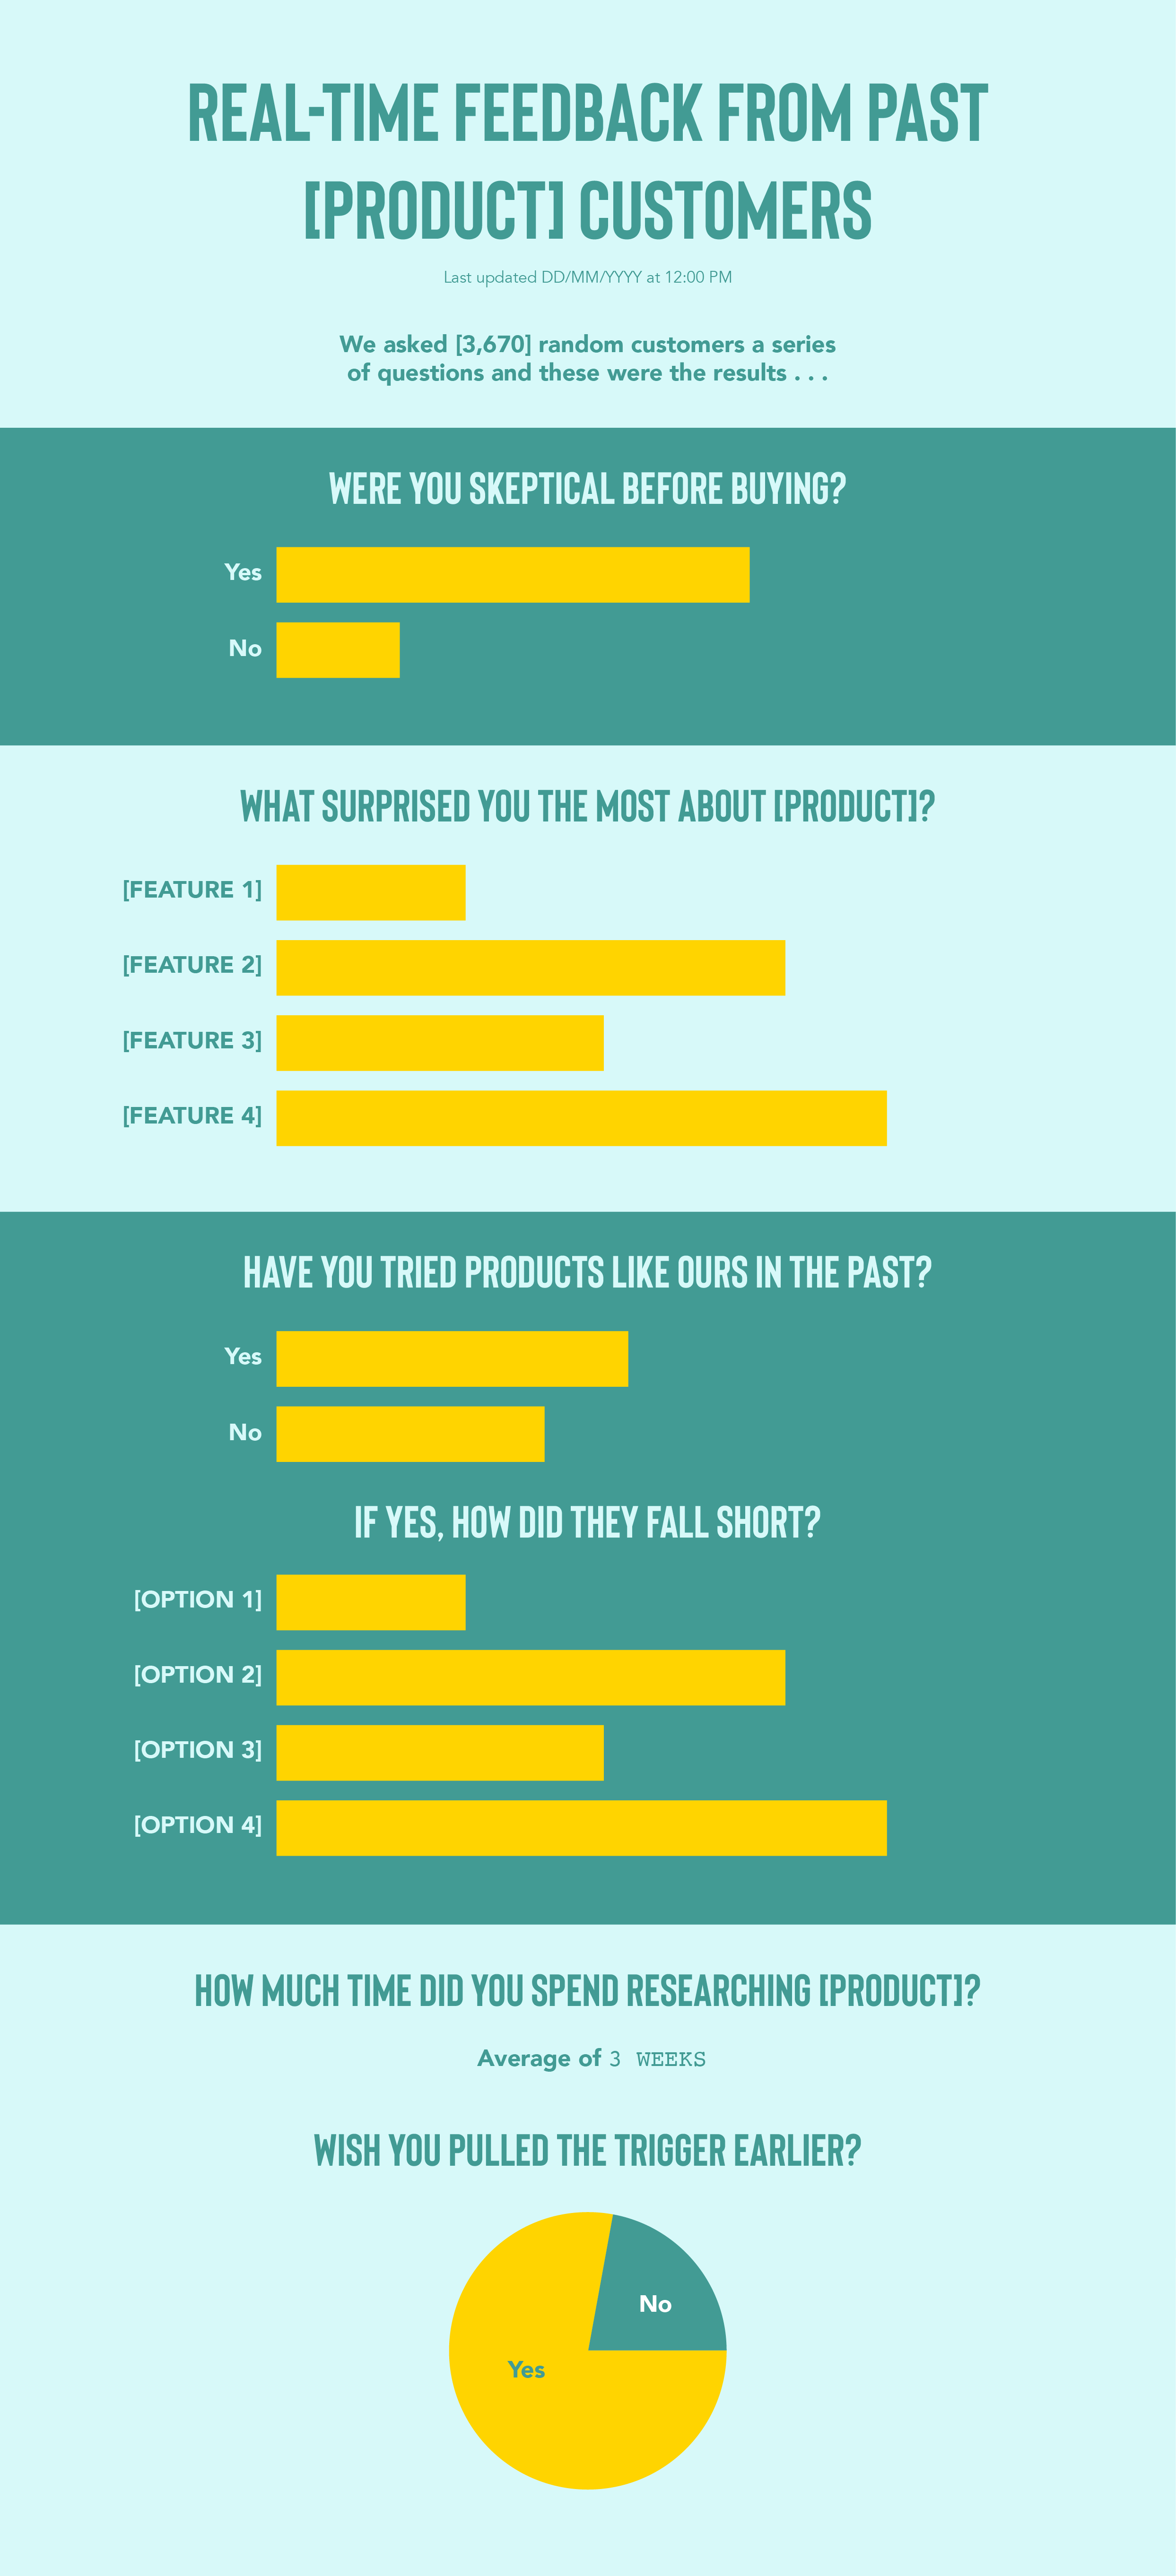 This infographic shows how we would present the results above the product reviews on the page to better influence buyer psychology